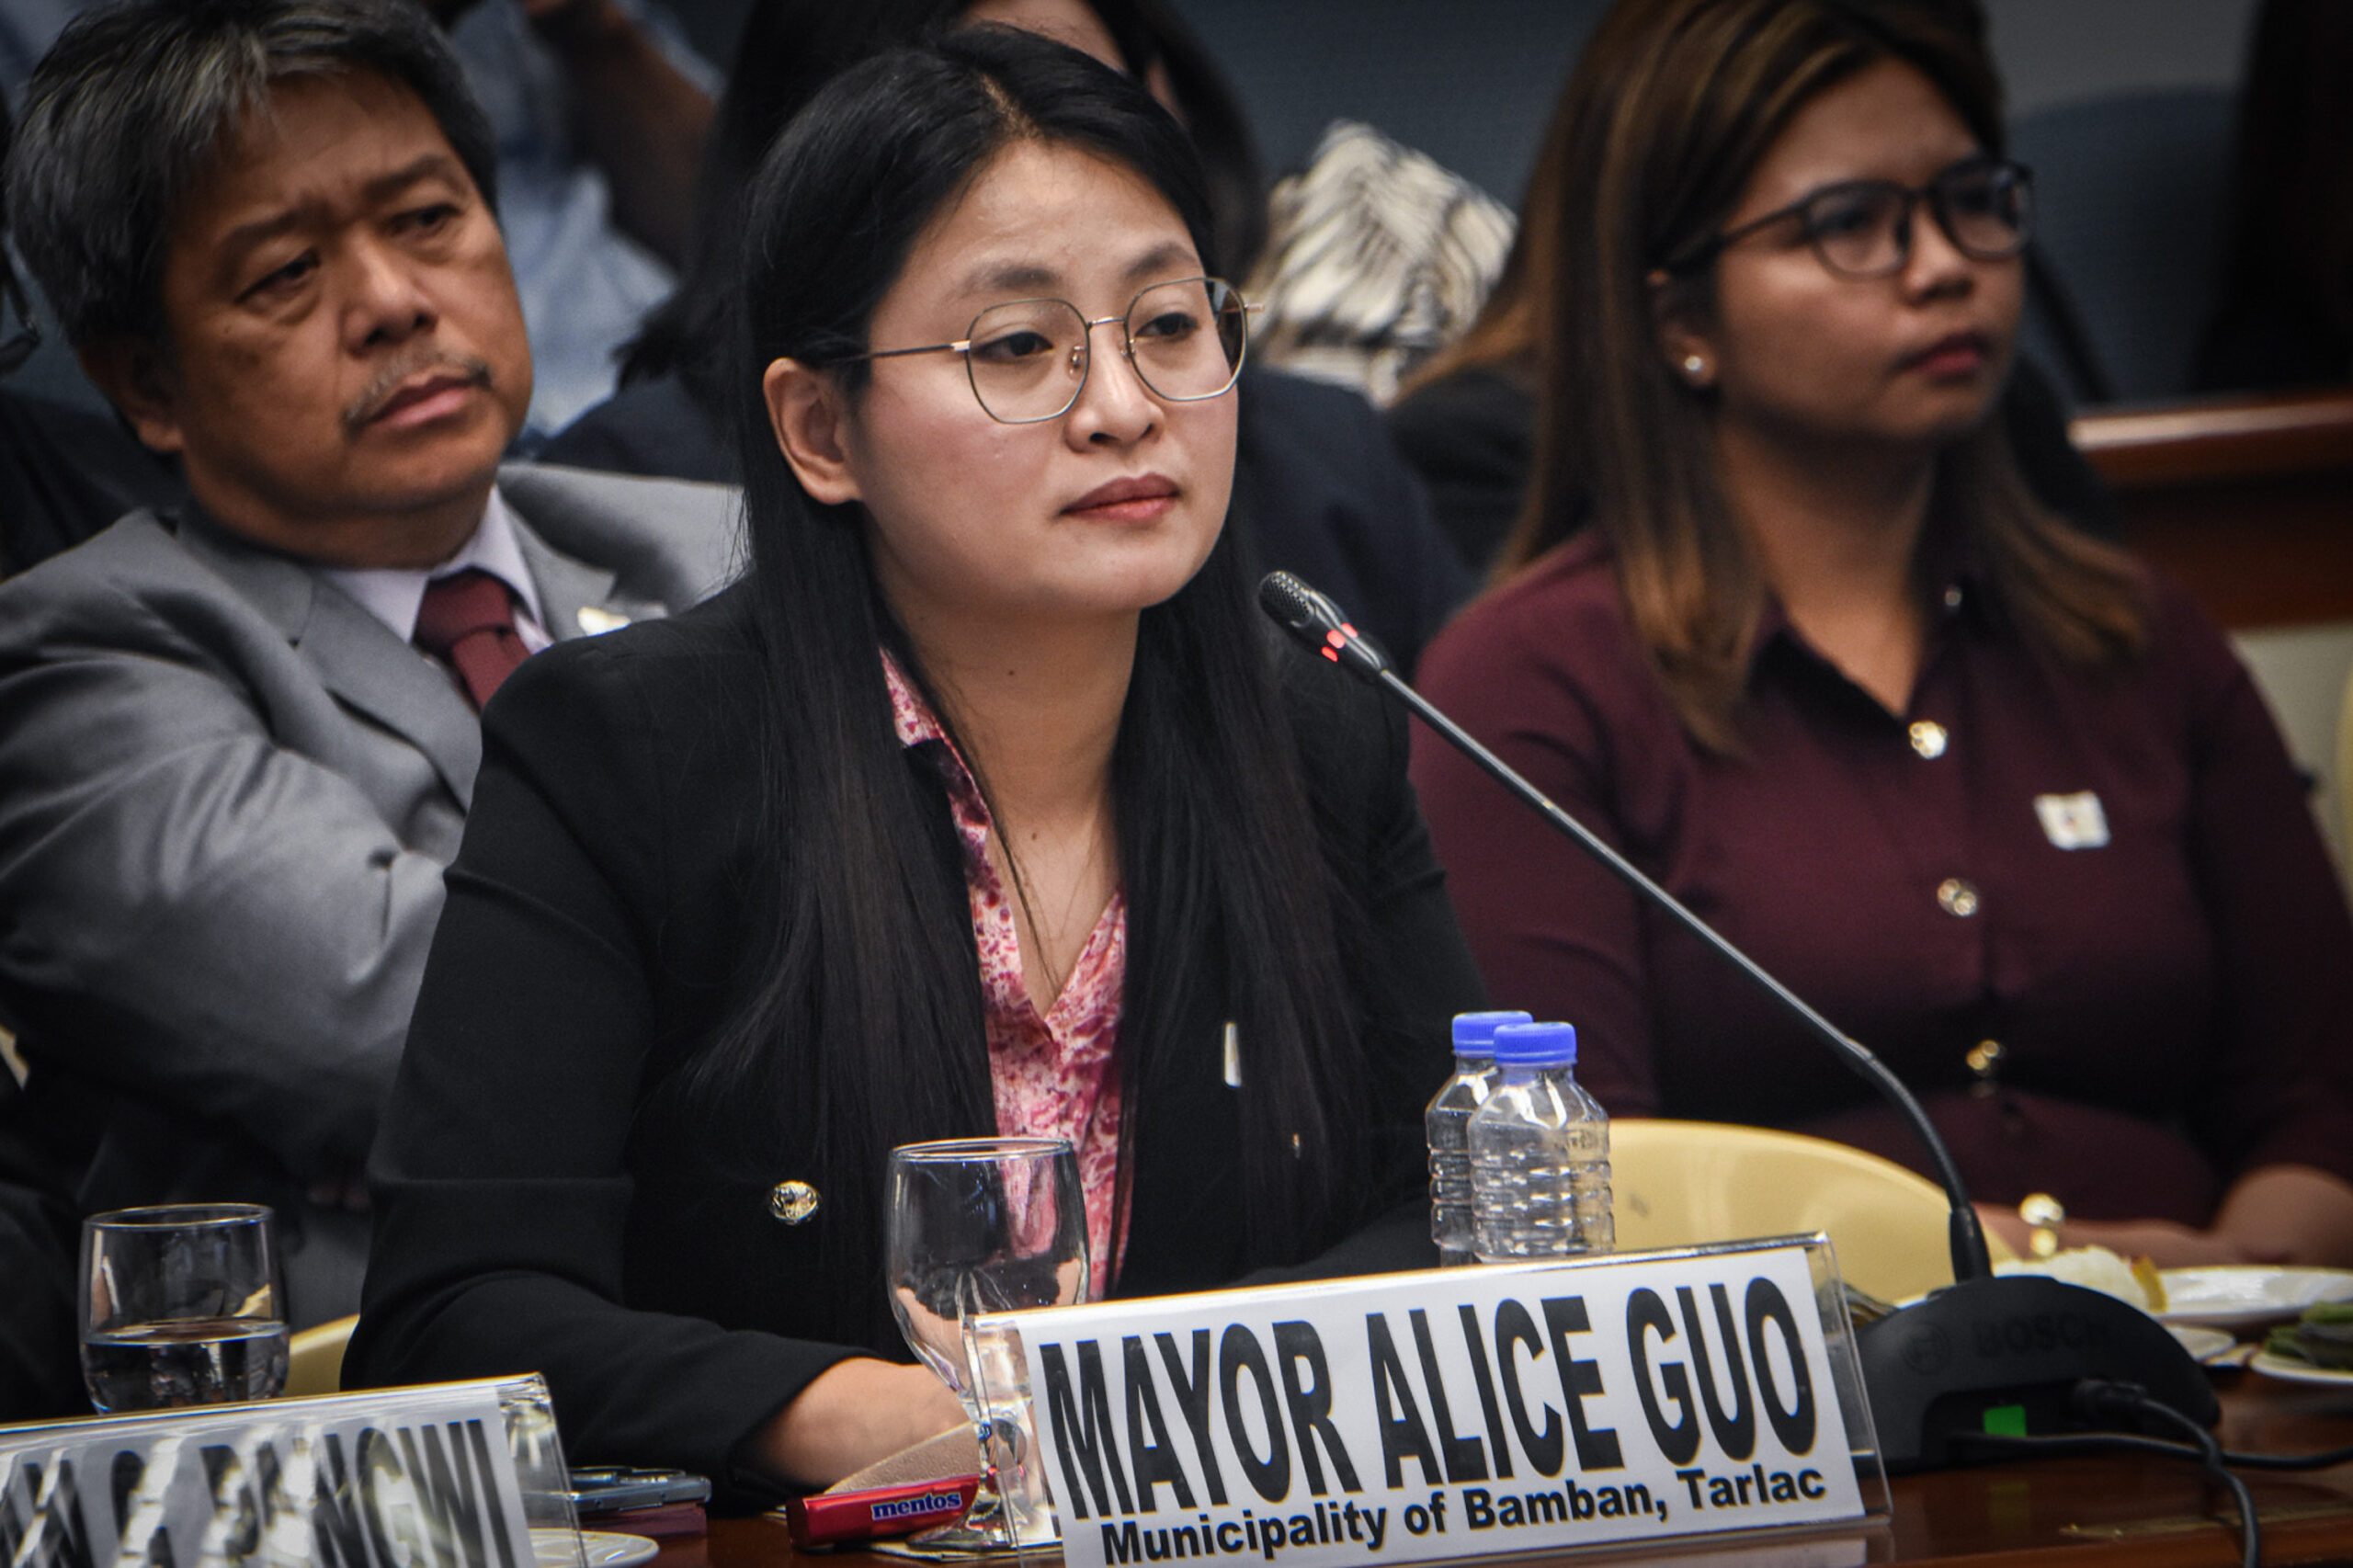 5 things that don’t add up in Mayor Alice Guo’s Senate testimony